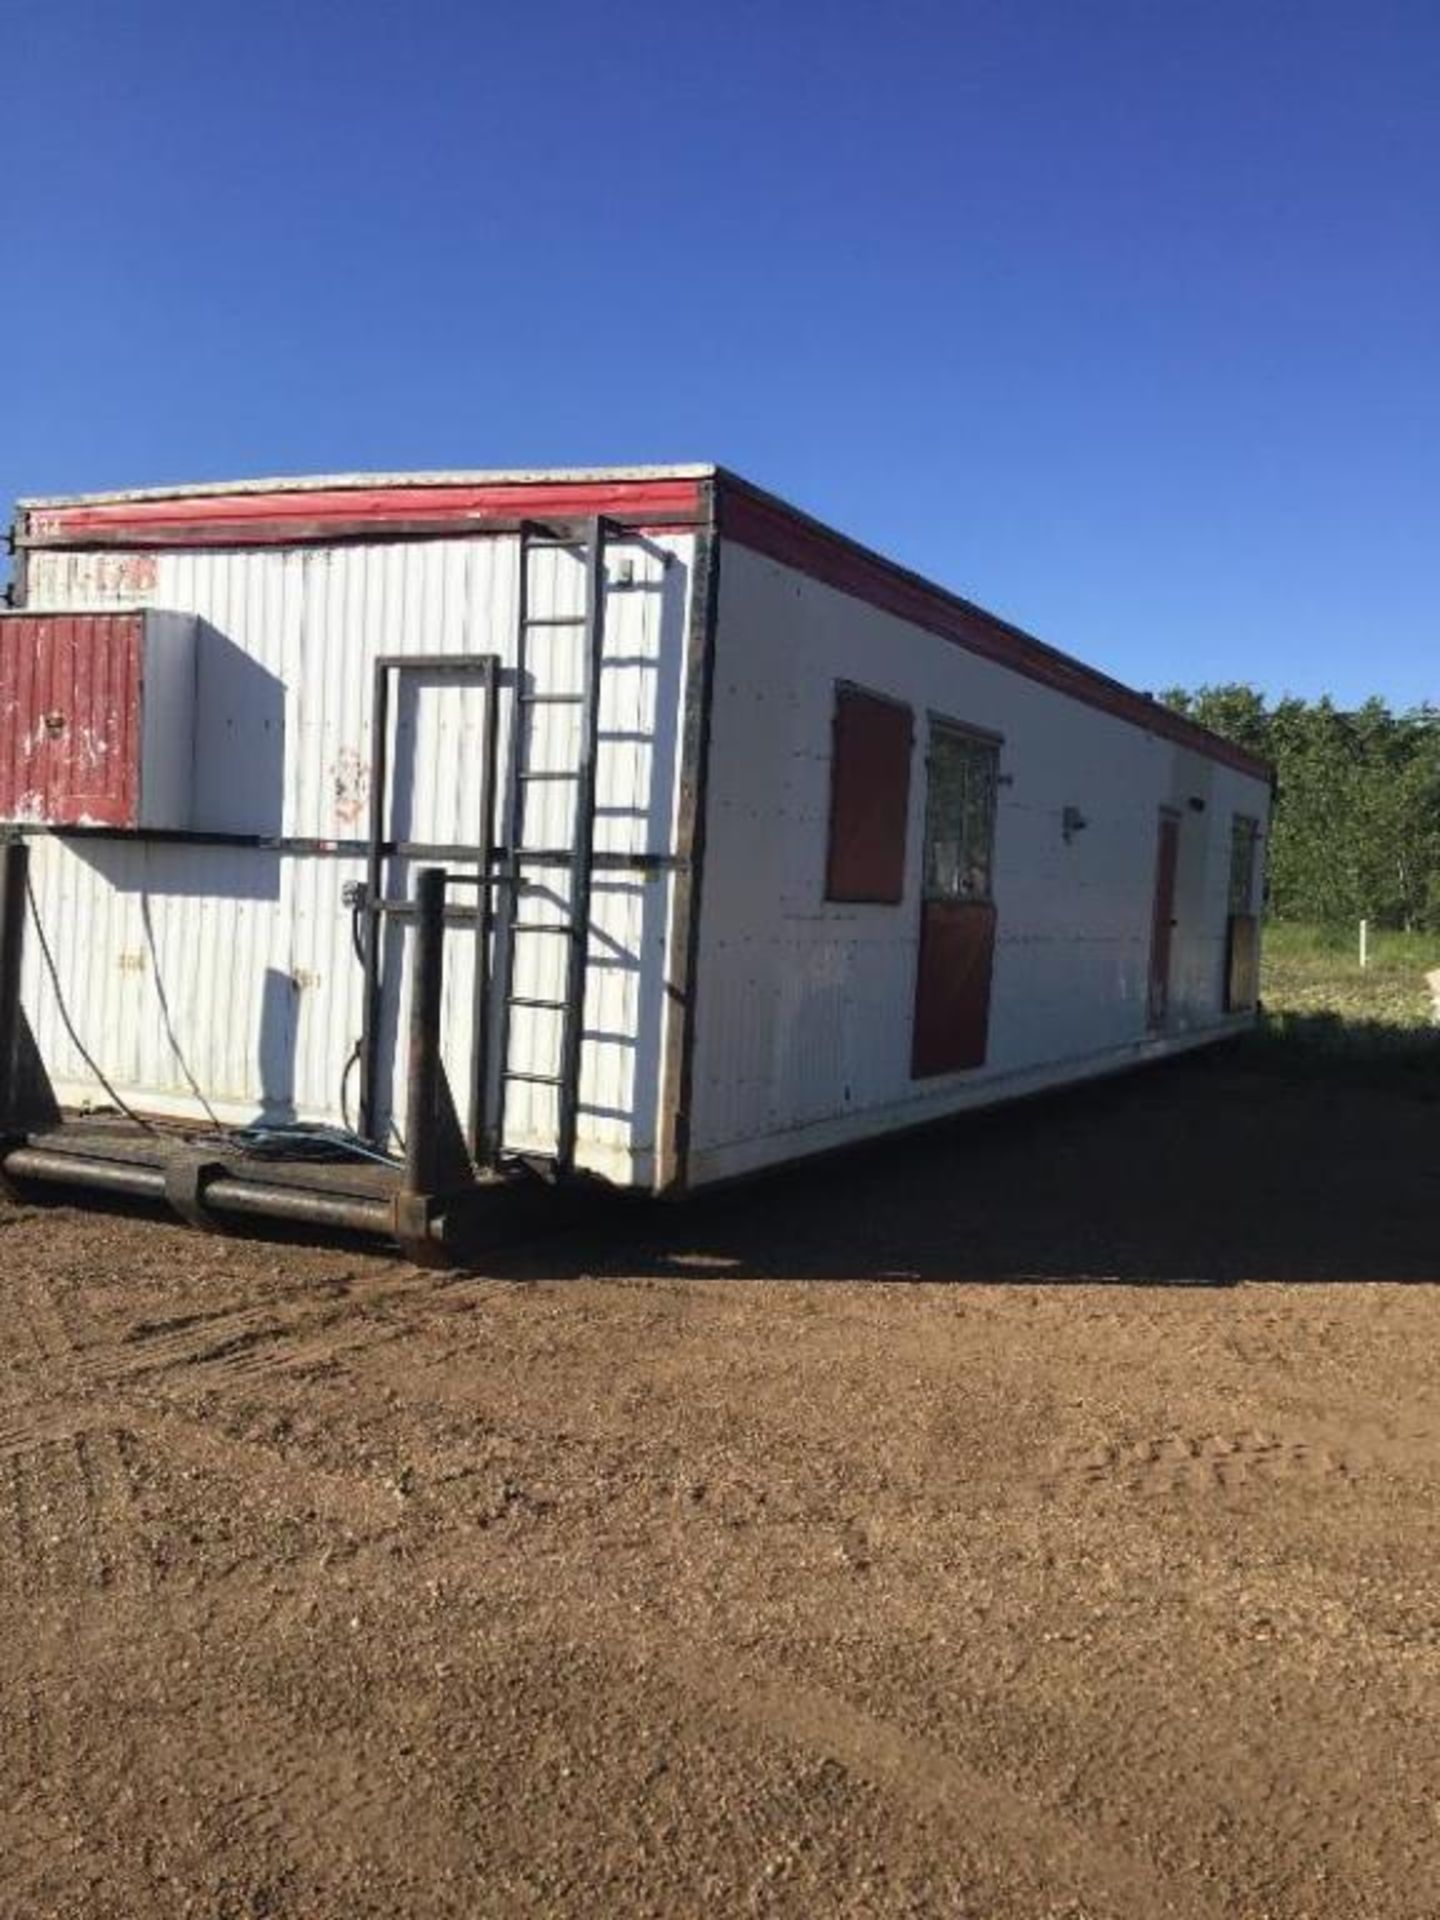 12Ft X 45Ft Self Contained Skid Mounted Bunk Unit Alta Fab, 2-Bedroom, Fridge, Propane Range, Shower - Image 2 of 31